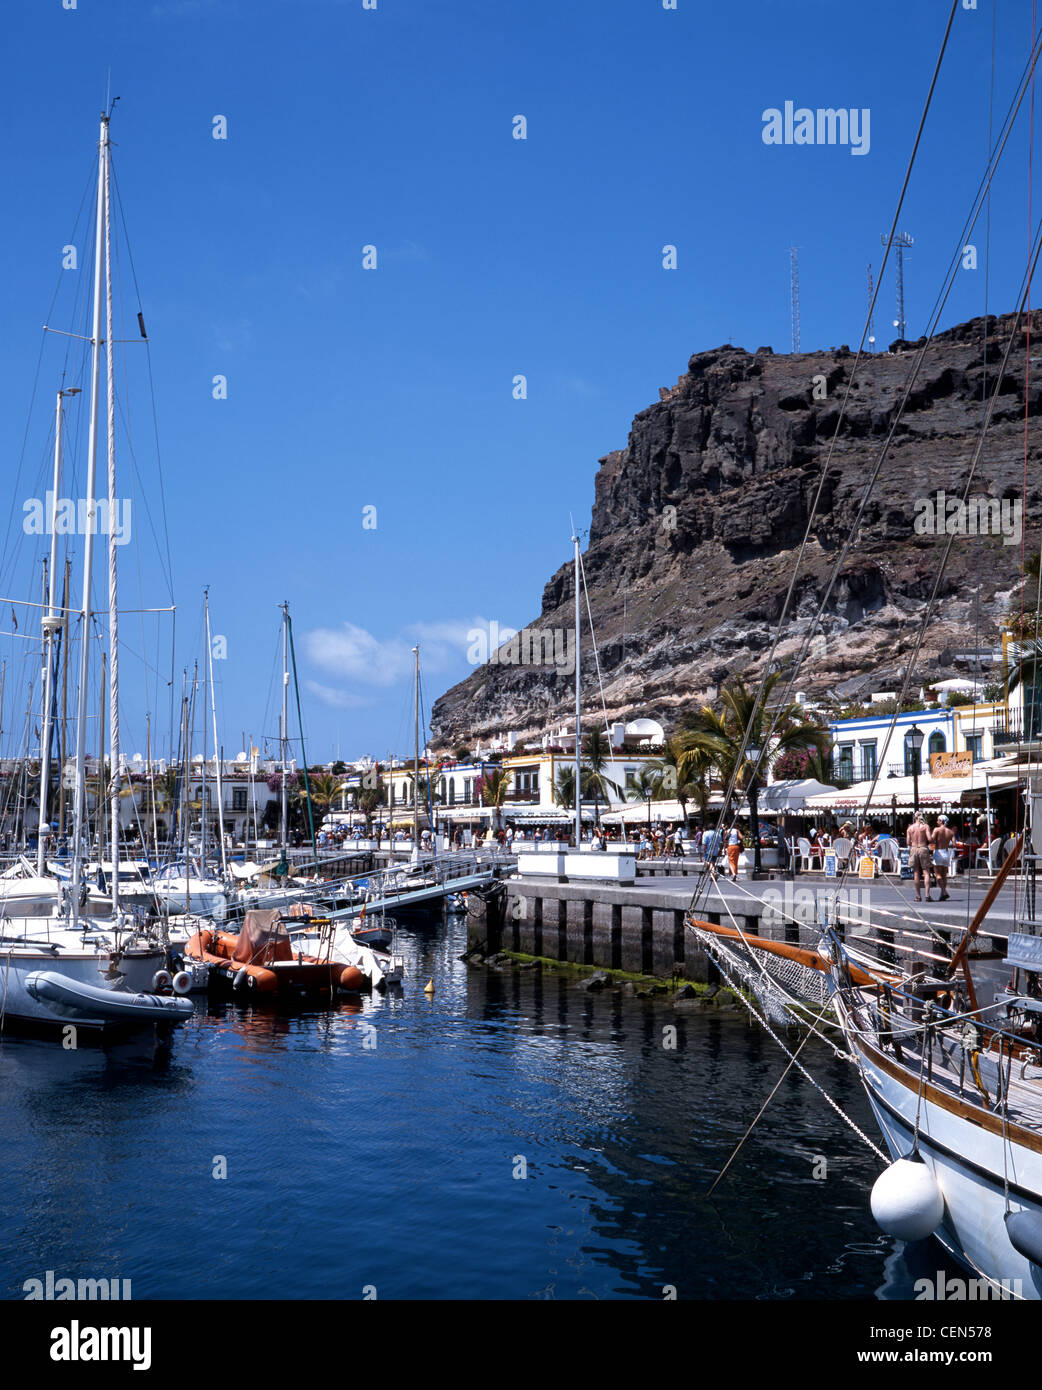 Yachts moored in the harbour, Puerto de Mogan, Gran Canaria, Canary Islands, Spain. Stock Photo